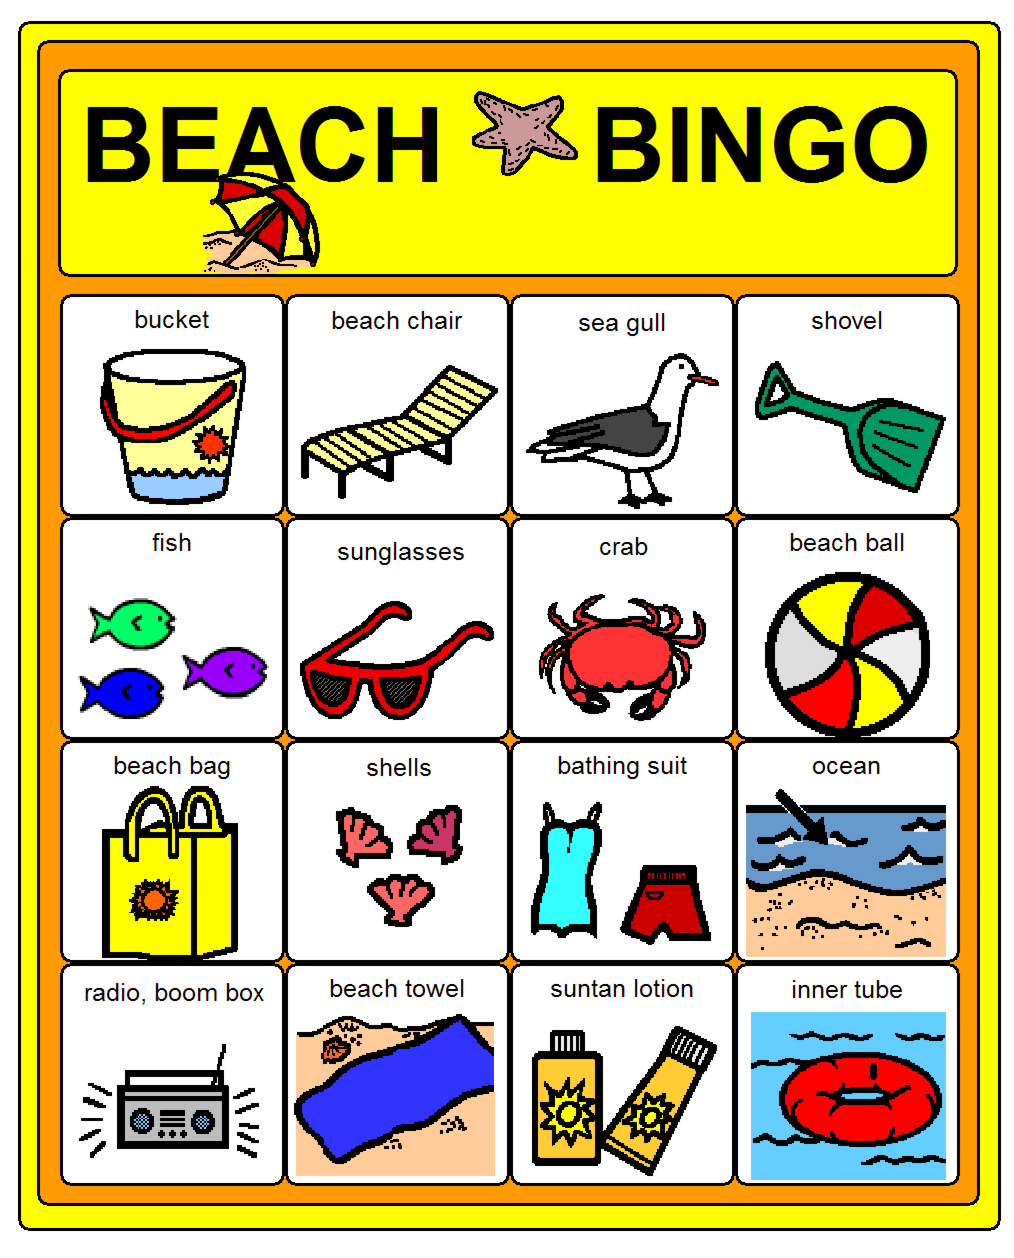 Beach Party Games for Children « PartyWorld